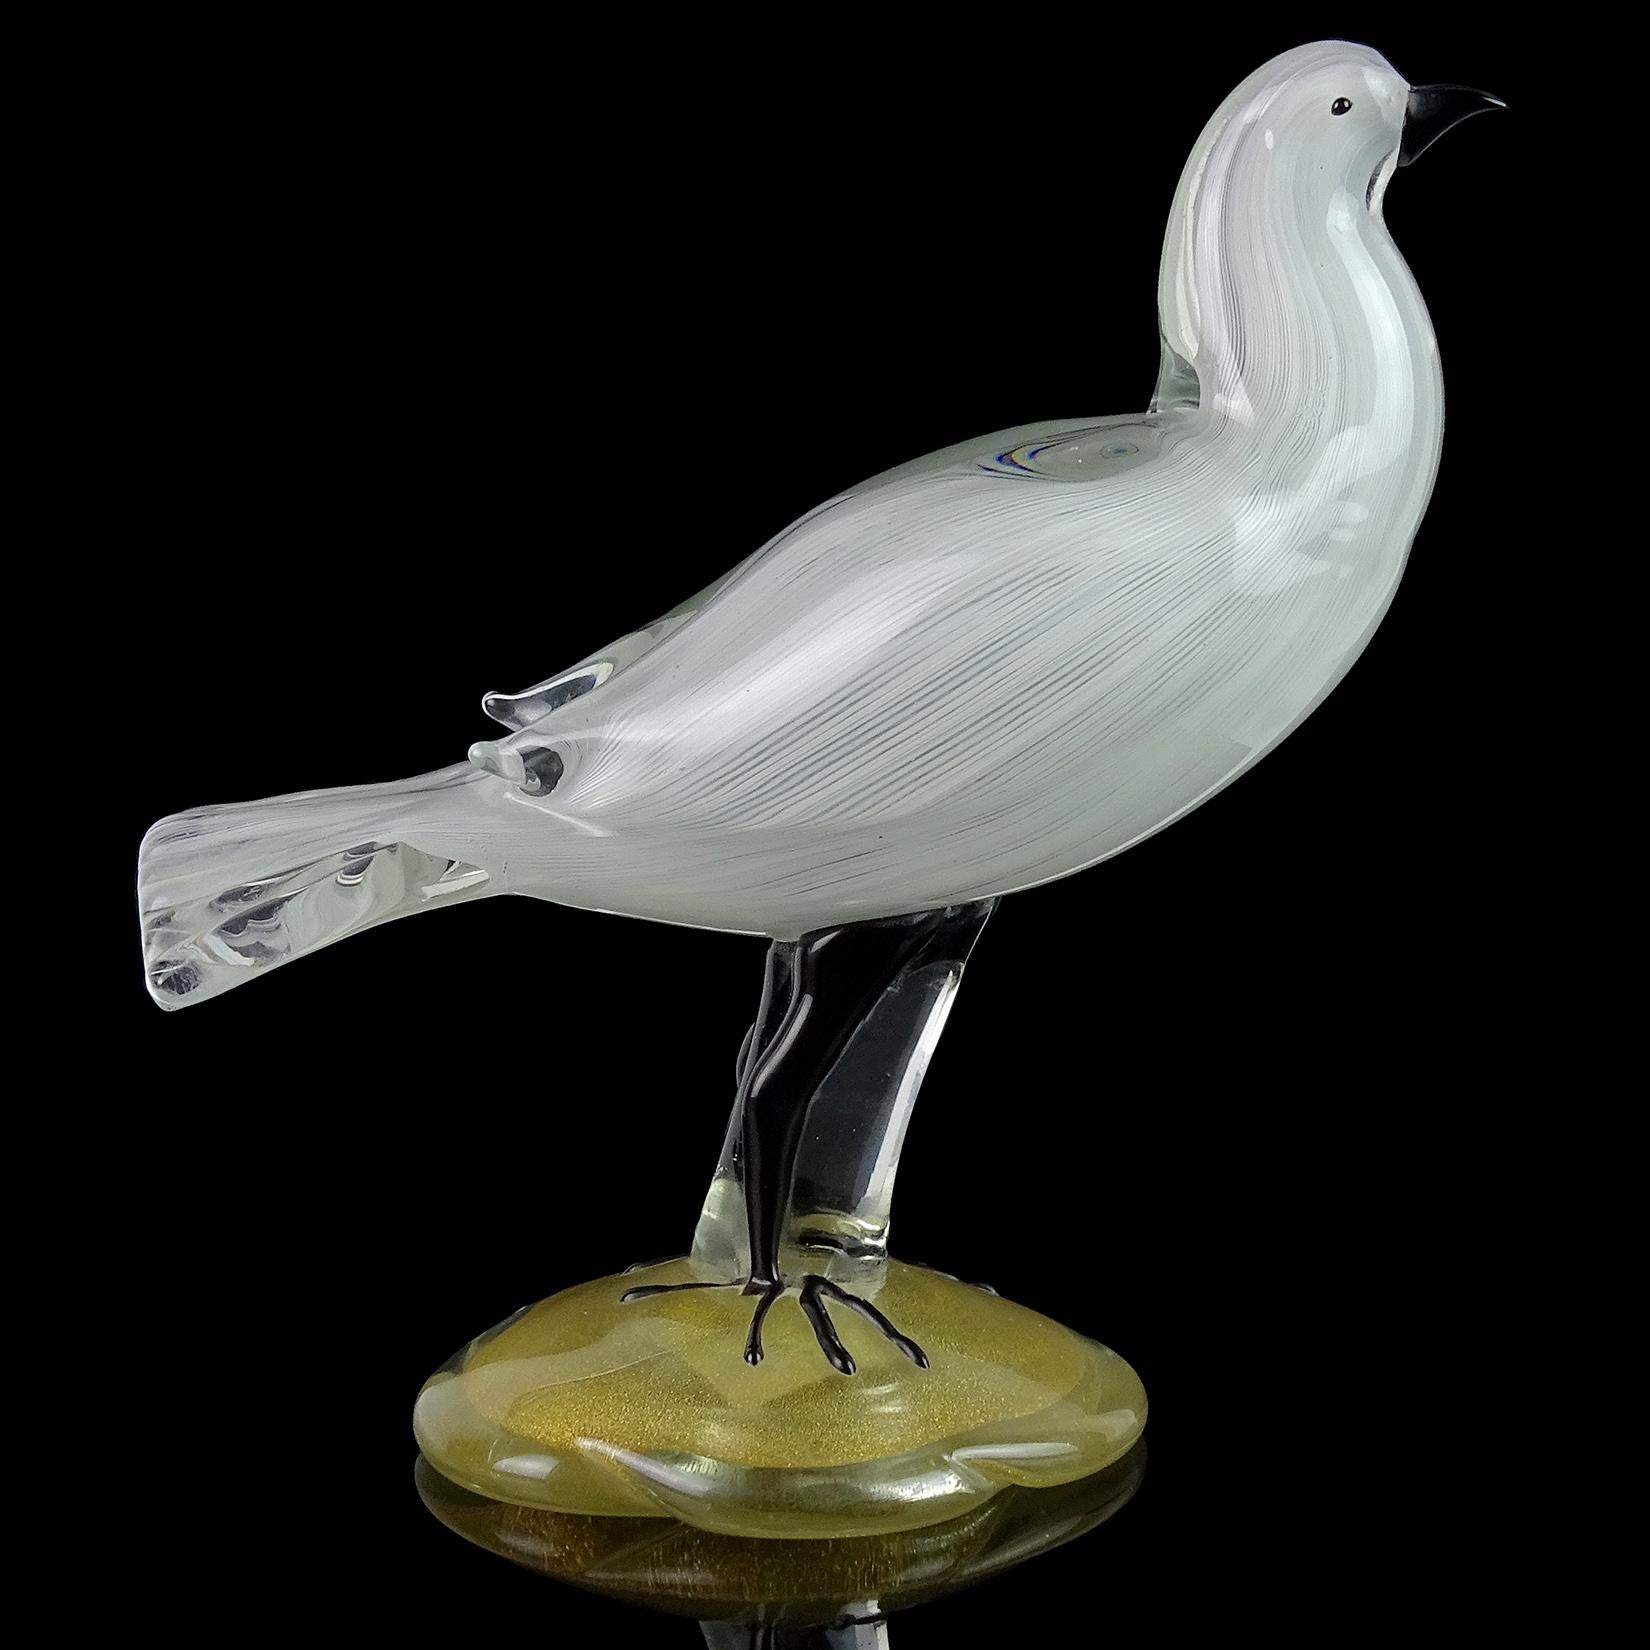 Beautiful vintage Murano hand blown white ribbons art glass bird sculpture with gold flecks base. Documented to designer Alfredo Barbini for the Salviati company. Labelled with an early “Camer Glass - New York - Made In Italy” label. Has applied